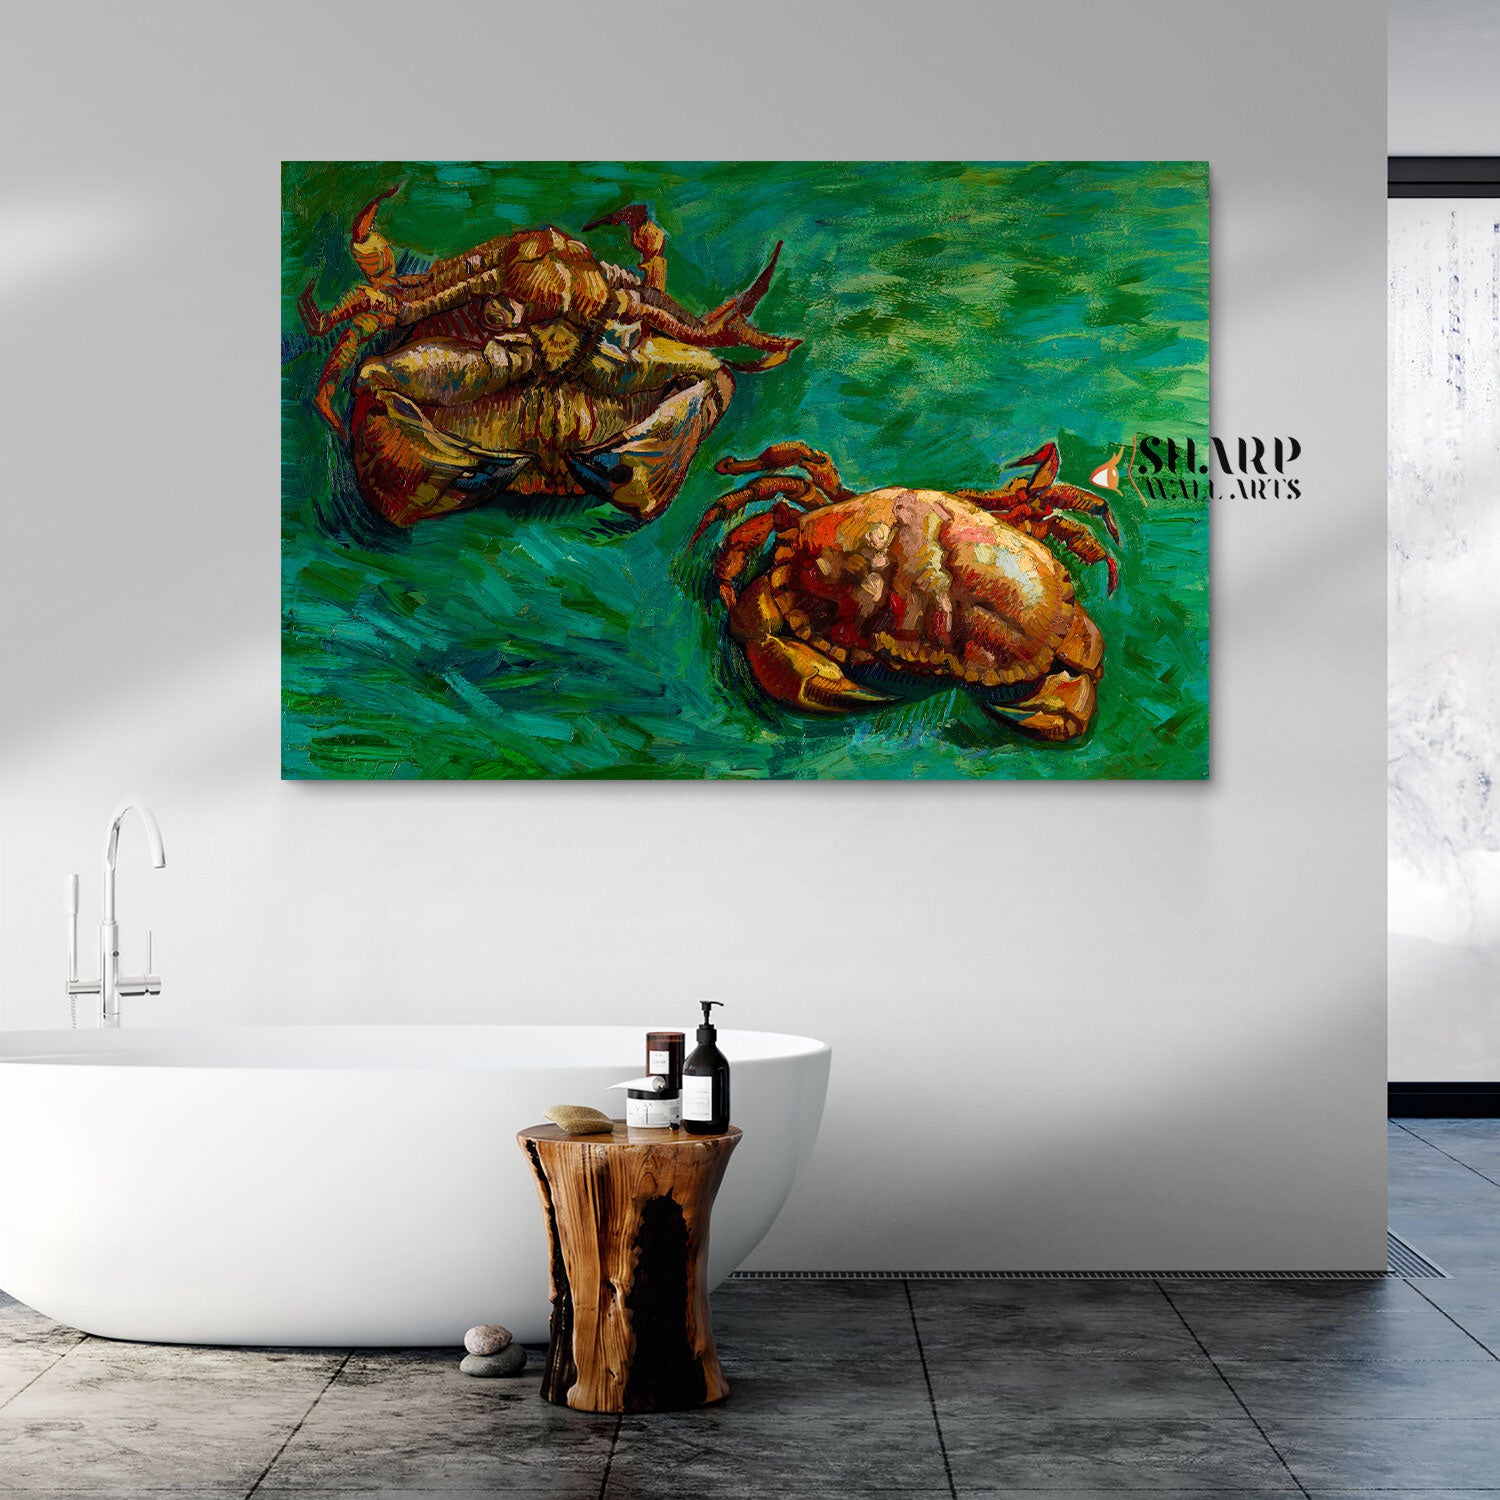 Two Crabs Van Gogh reproduction